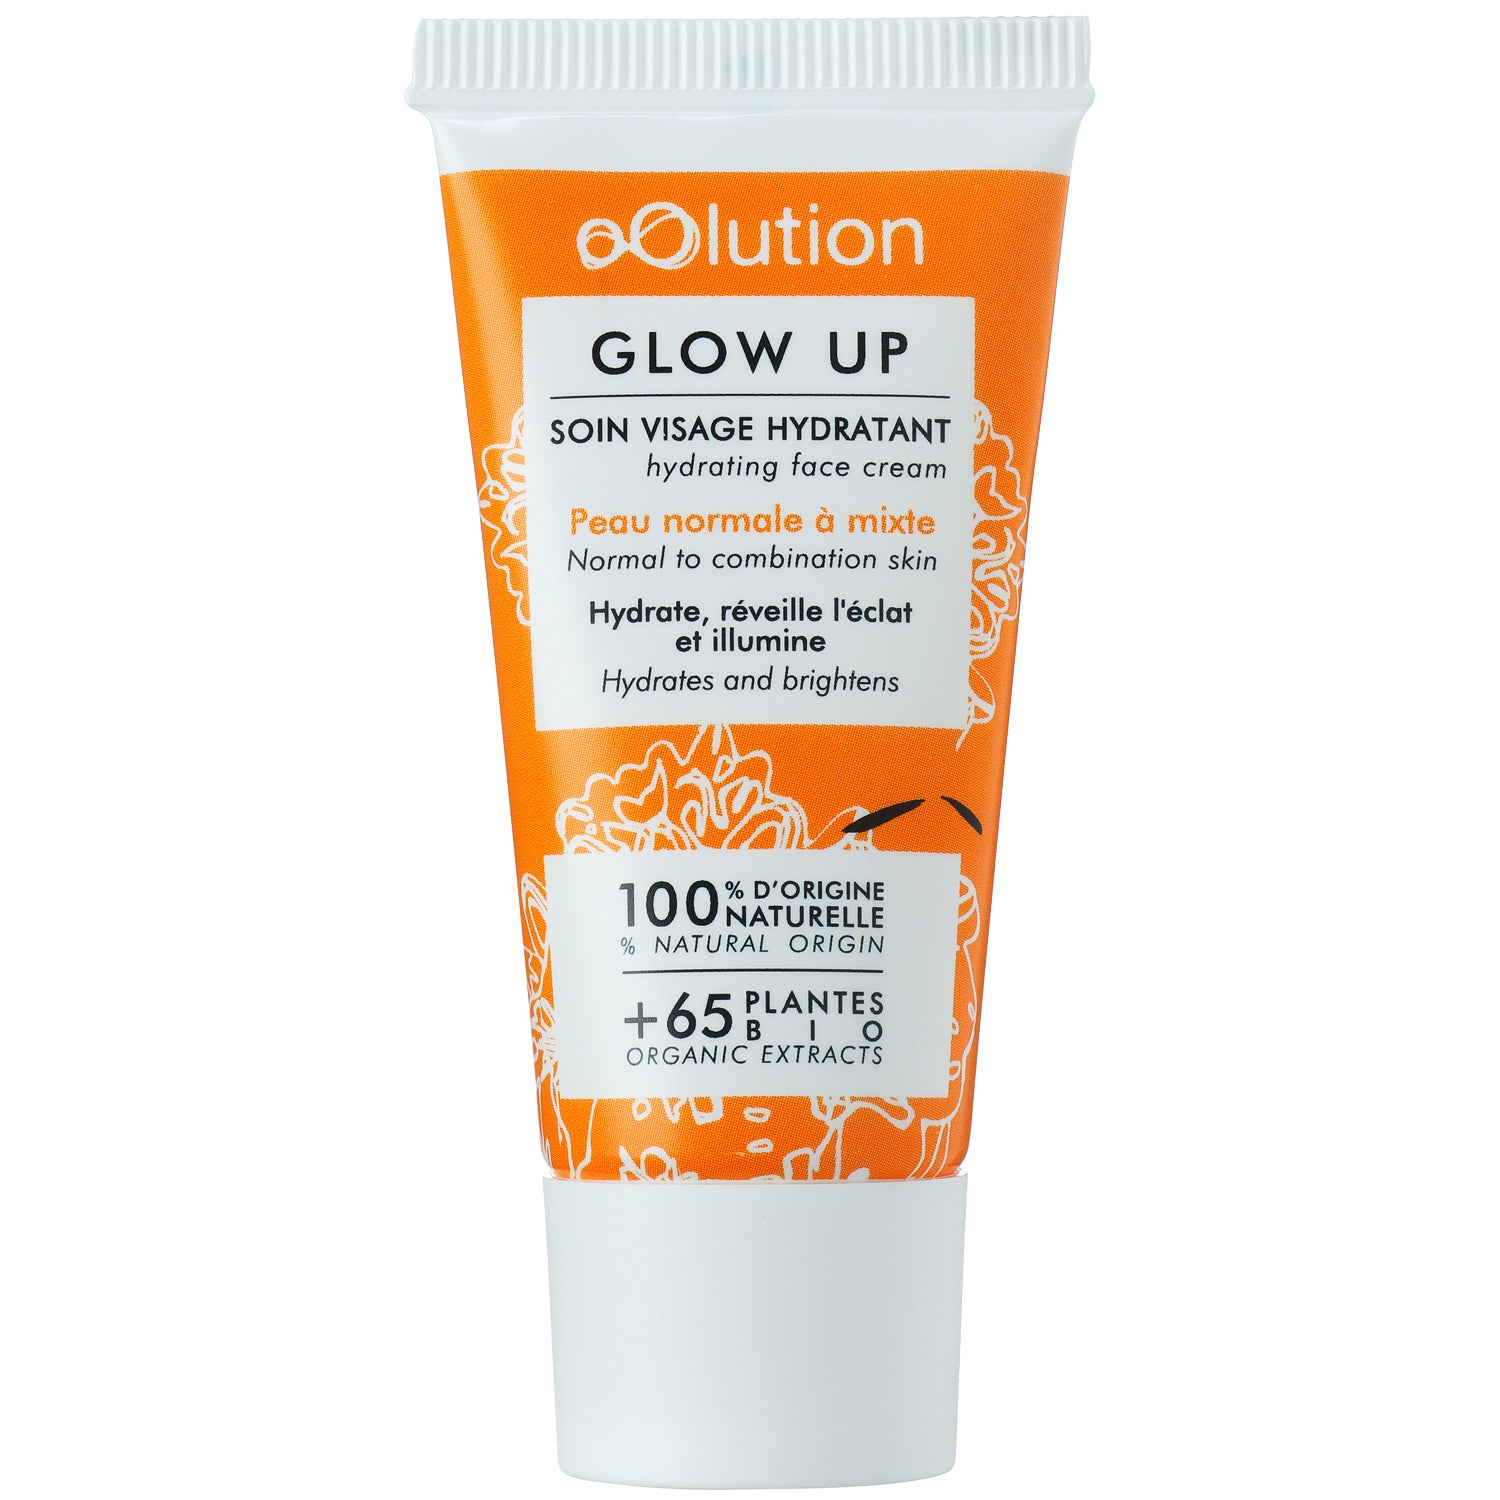 Soin Crème Glow Up hydratant 15ml